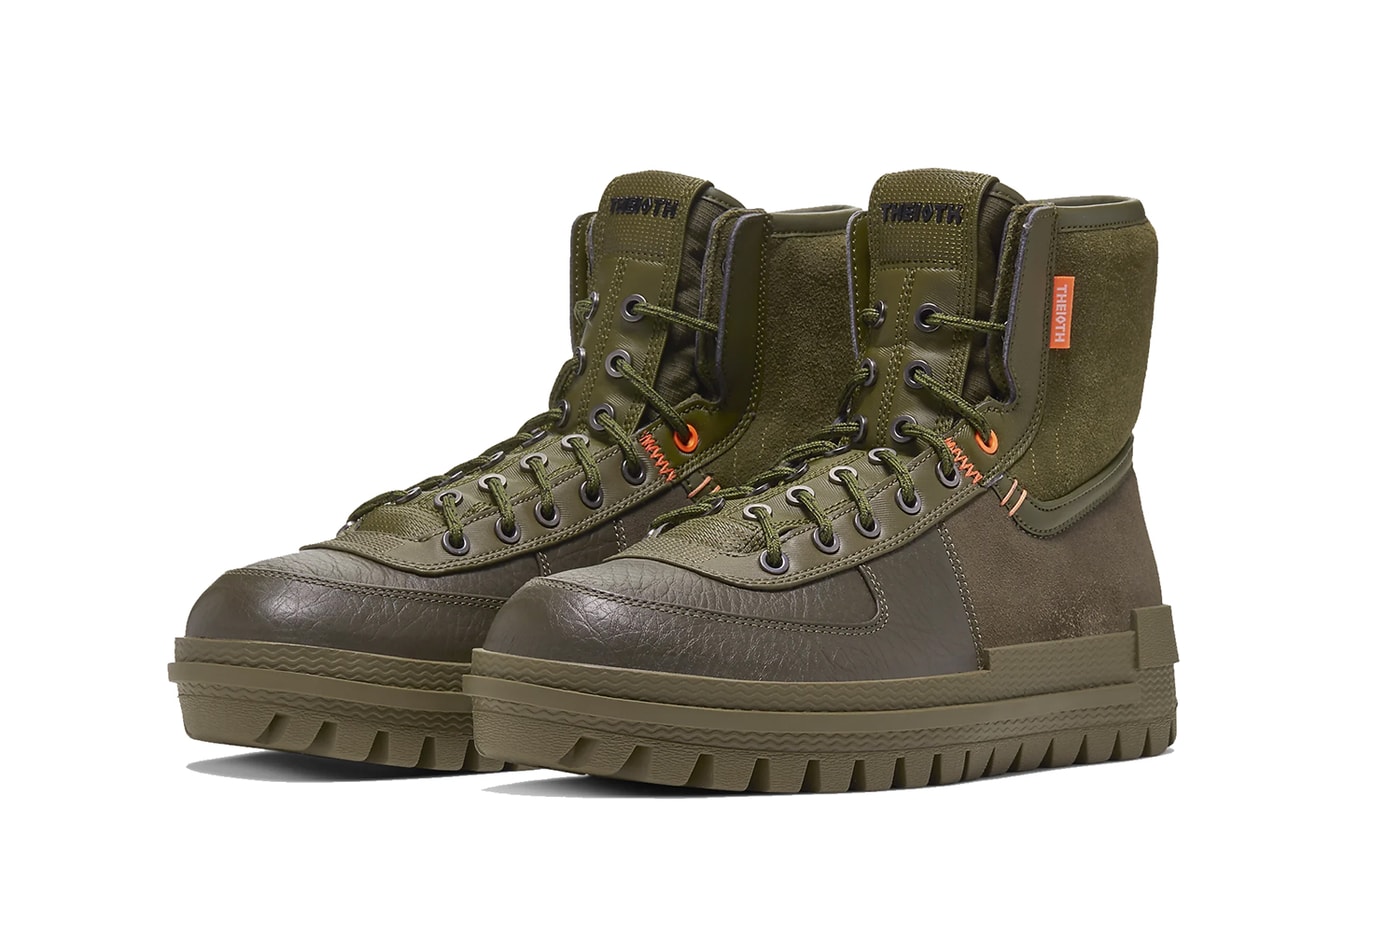 Nike Xarr Boot Release boots outwear winter snow rain military olive green sage green leather Air Force 1 shoes sneakers kicks the10th 